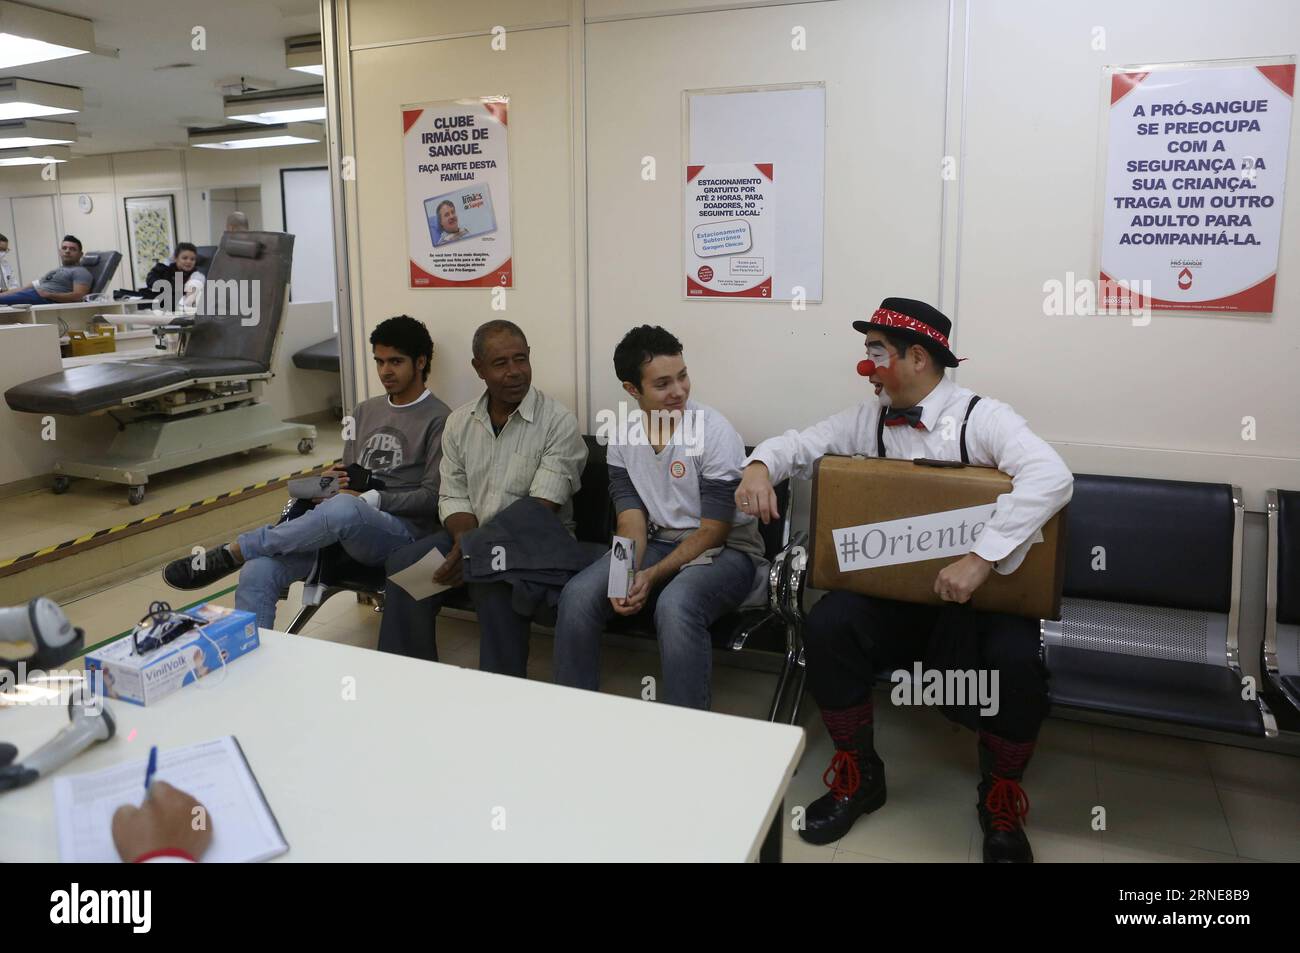 (160614) -- SAO PAULO, June 14, 2016 -- Image taken on June 9, 2016, shows Gilberto Kido (C), 50, talking to other blood donors in the waiting room at the Pro Sangre Foundation in Sao Paulo, Brazil. Gilberto Kido has been a voluntary blood donor for the last 30 years after his mother died while waiting for a kidney transplant. Using his clown character, Kido has an objective to encourage the blood donation for saving lives. The World Blood Donor Day is celebrated every year on June 14. In 2016 the theme of the campaign is Blood connects us all , the World Health Organization (WHO) has also ado Stock Photo